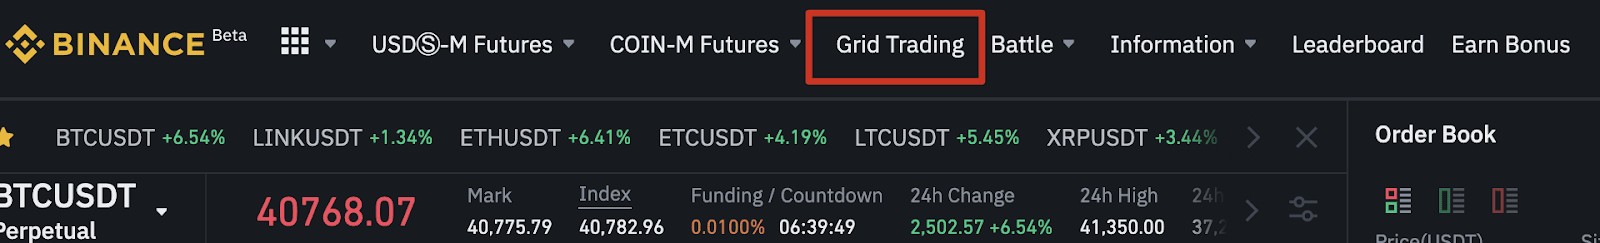 Press [Grid Trading] on the top menu bar then select the contrac